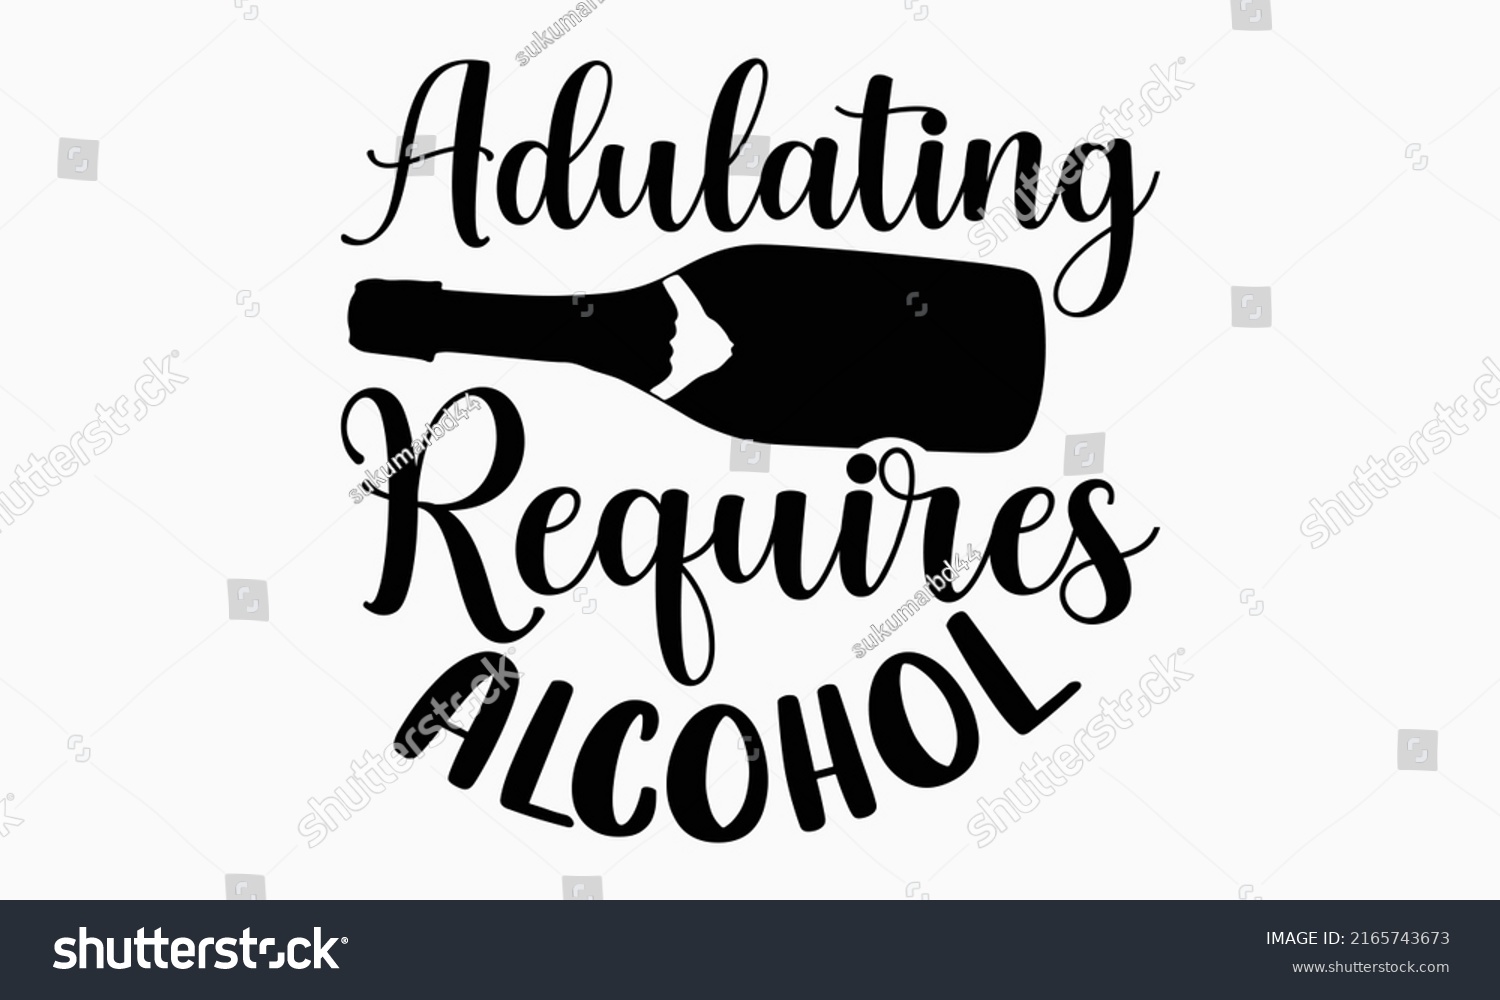 SVG of Adulating requires alcohol - Alcohol t shirt design, Hand drawn lettering phrase, Calligraphy graphic design, SVG Files for Cutting Cricut and Silhouette svg